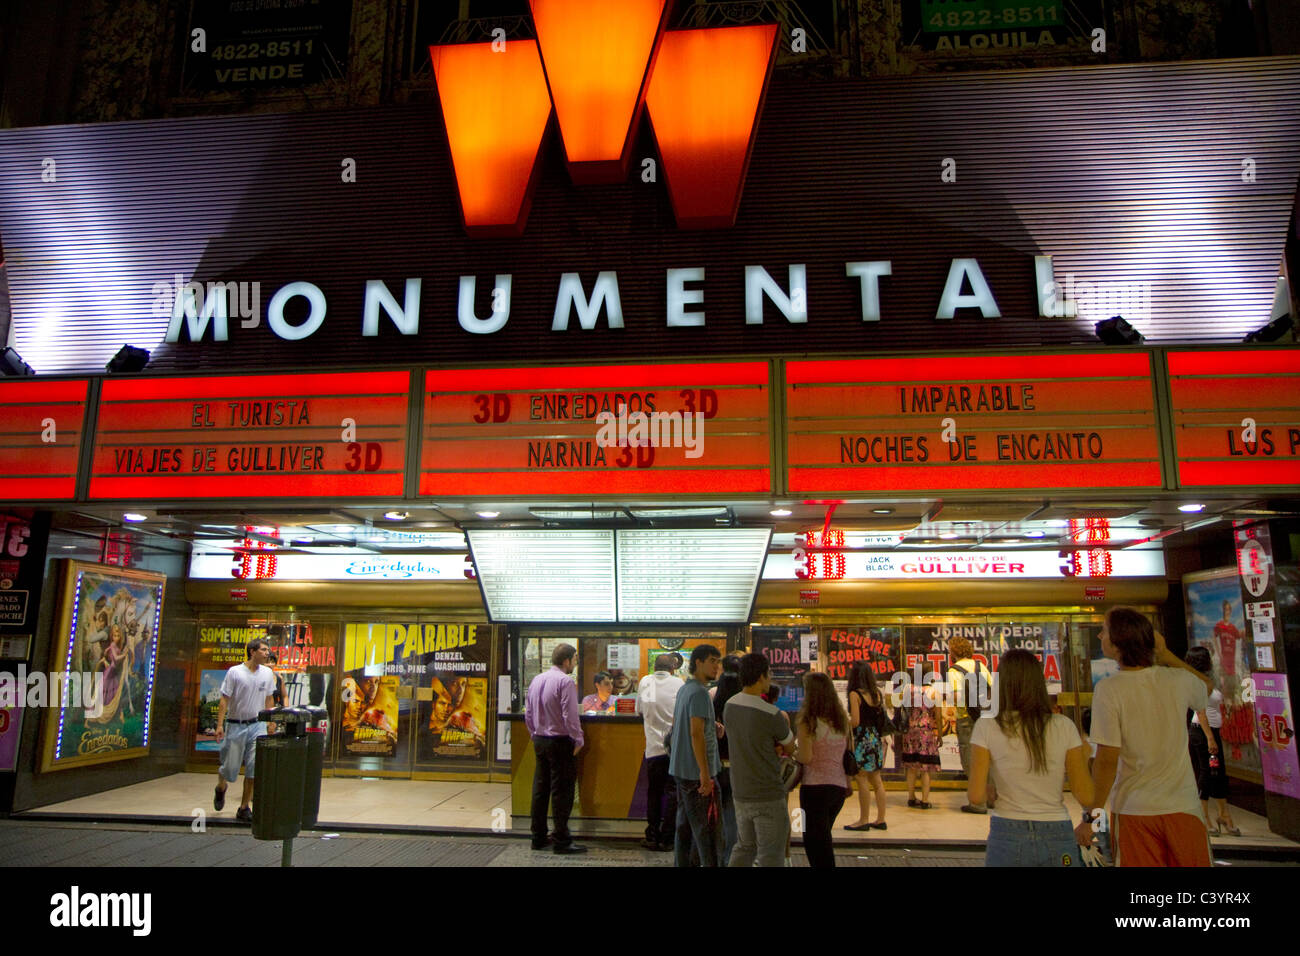 Movie theater in Buenos Aires, Argentina. Stock Photo